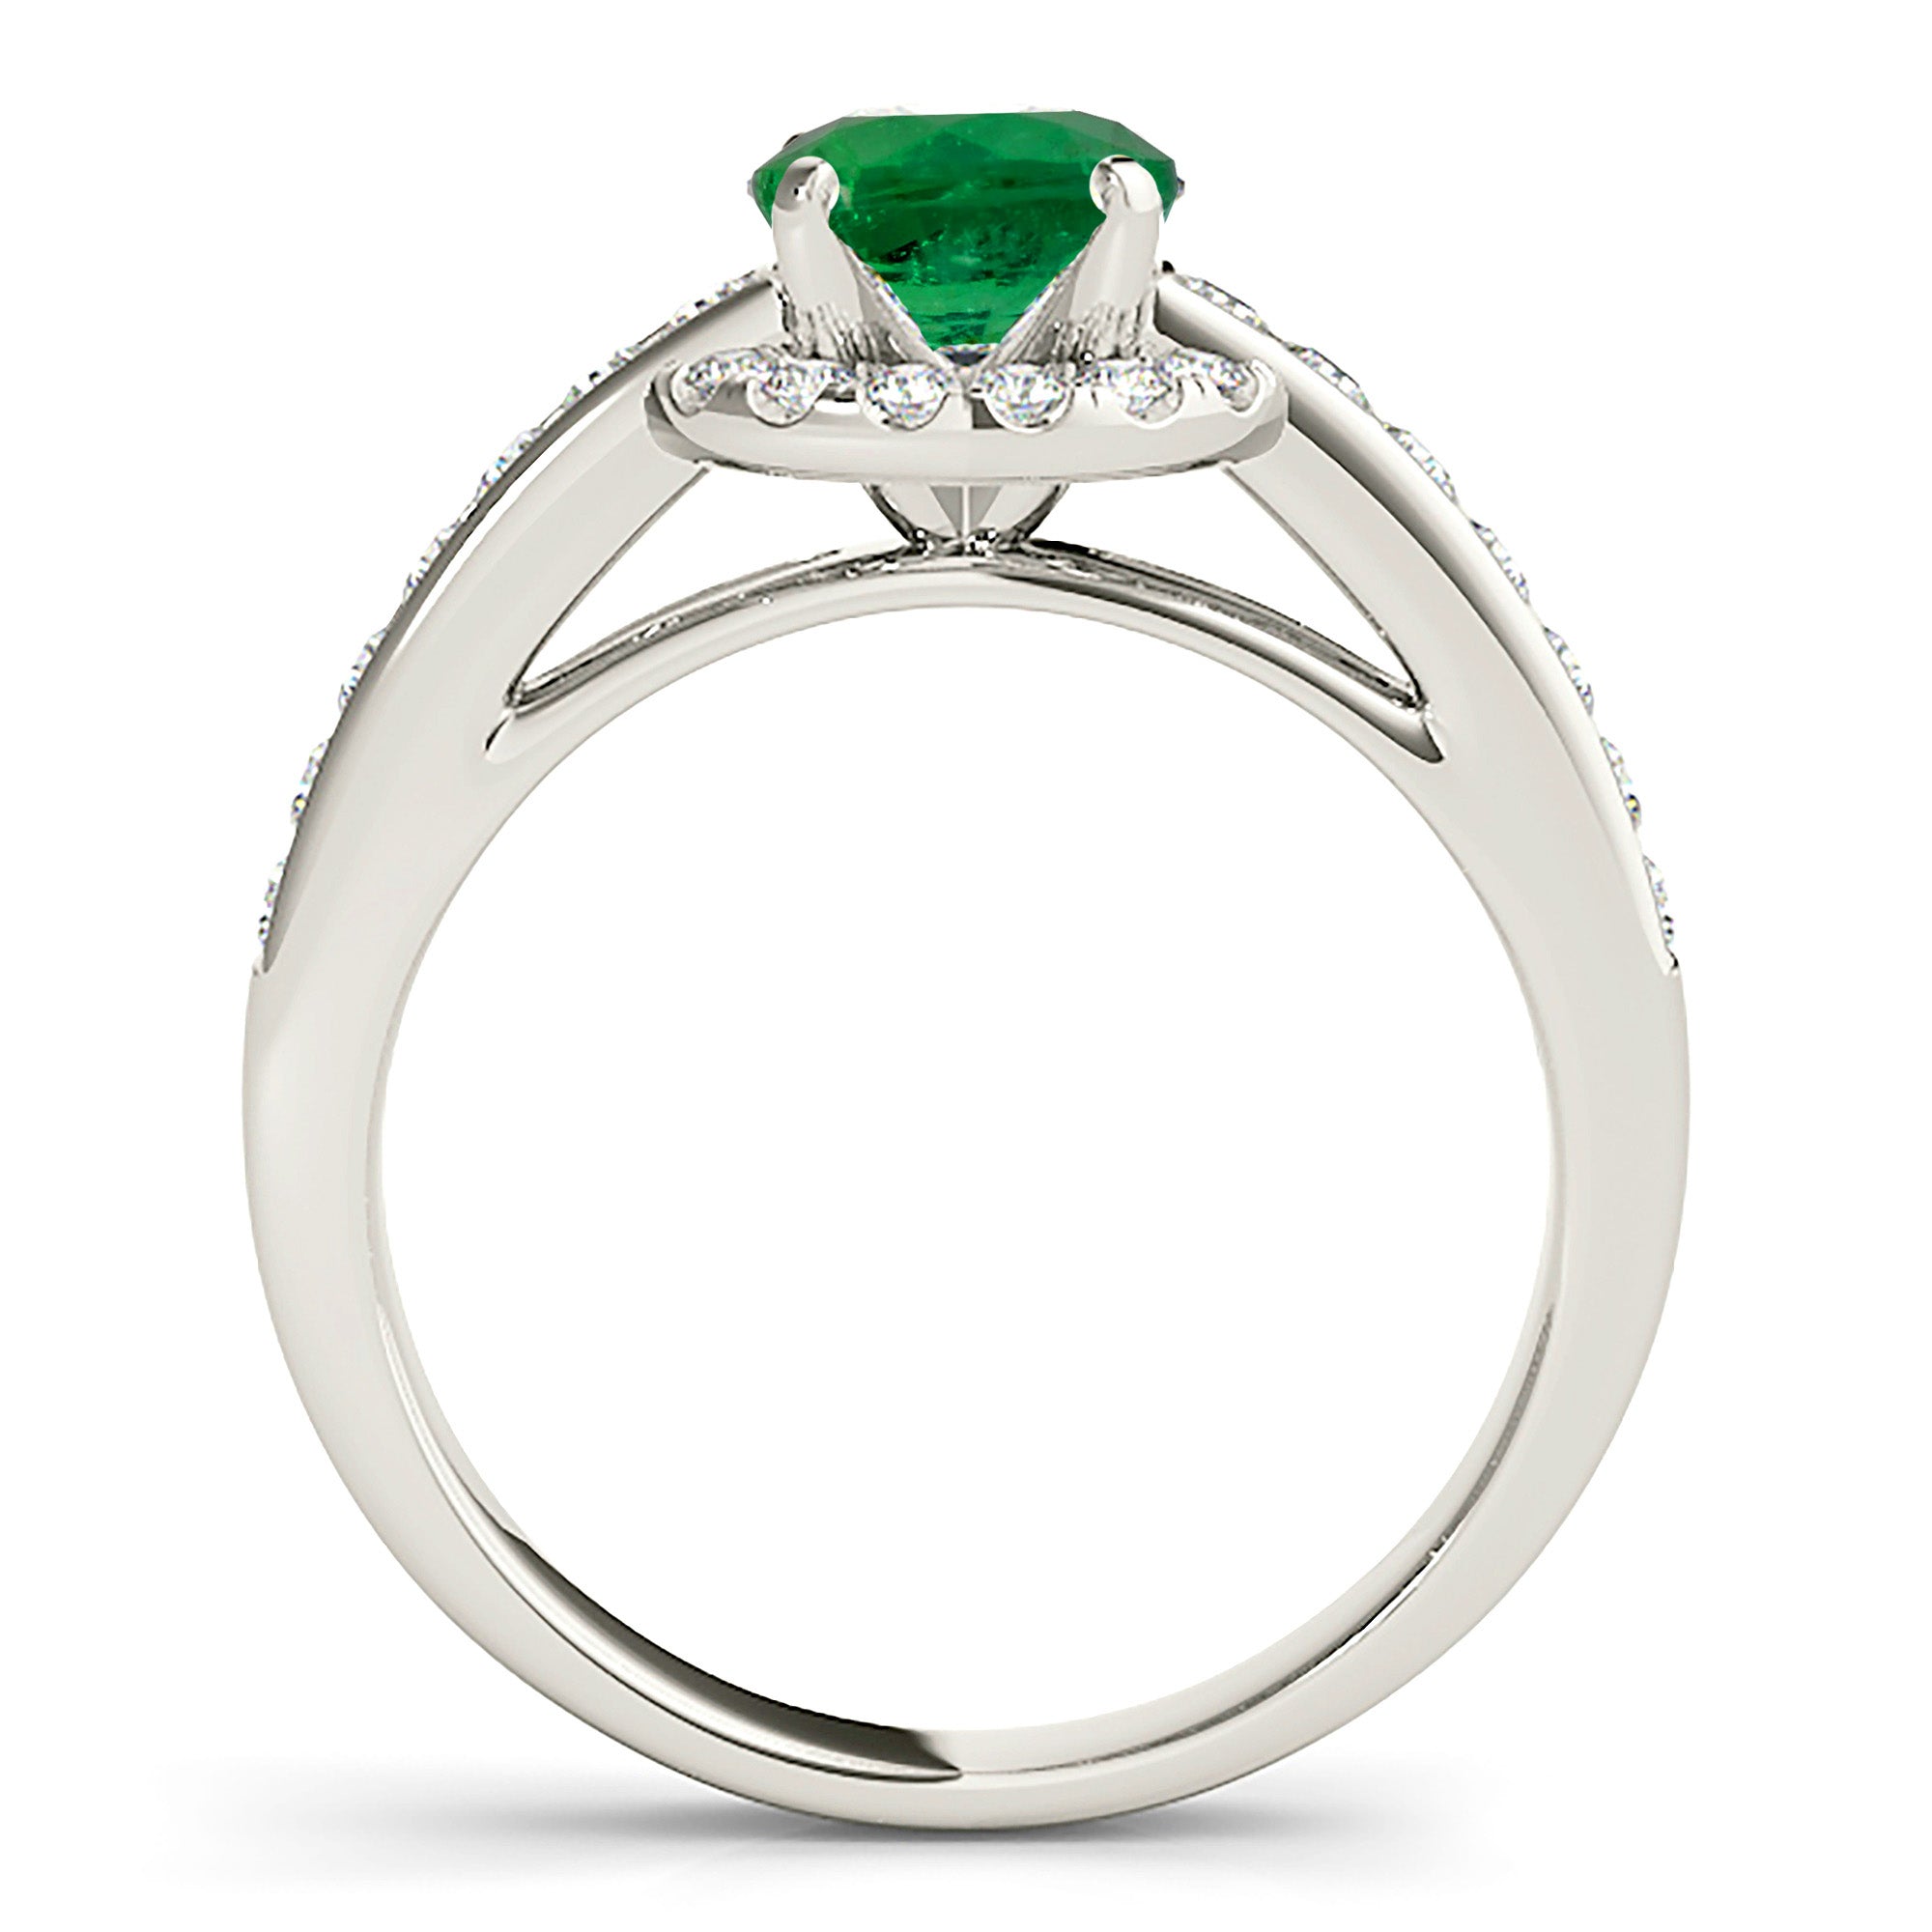 1.75 ct. Genuine Emerald Ring With 0.40 ctw. Diamond Halo, Channel Set Diamond Band-in 14K/18K White, Yellow, Rose Gold and Platinum - Christmas Jewelry Gift -VIRABYANI